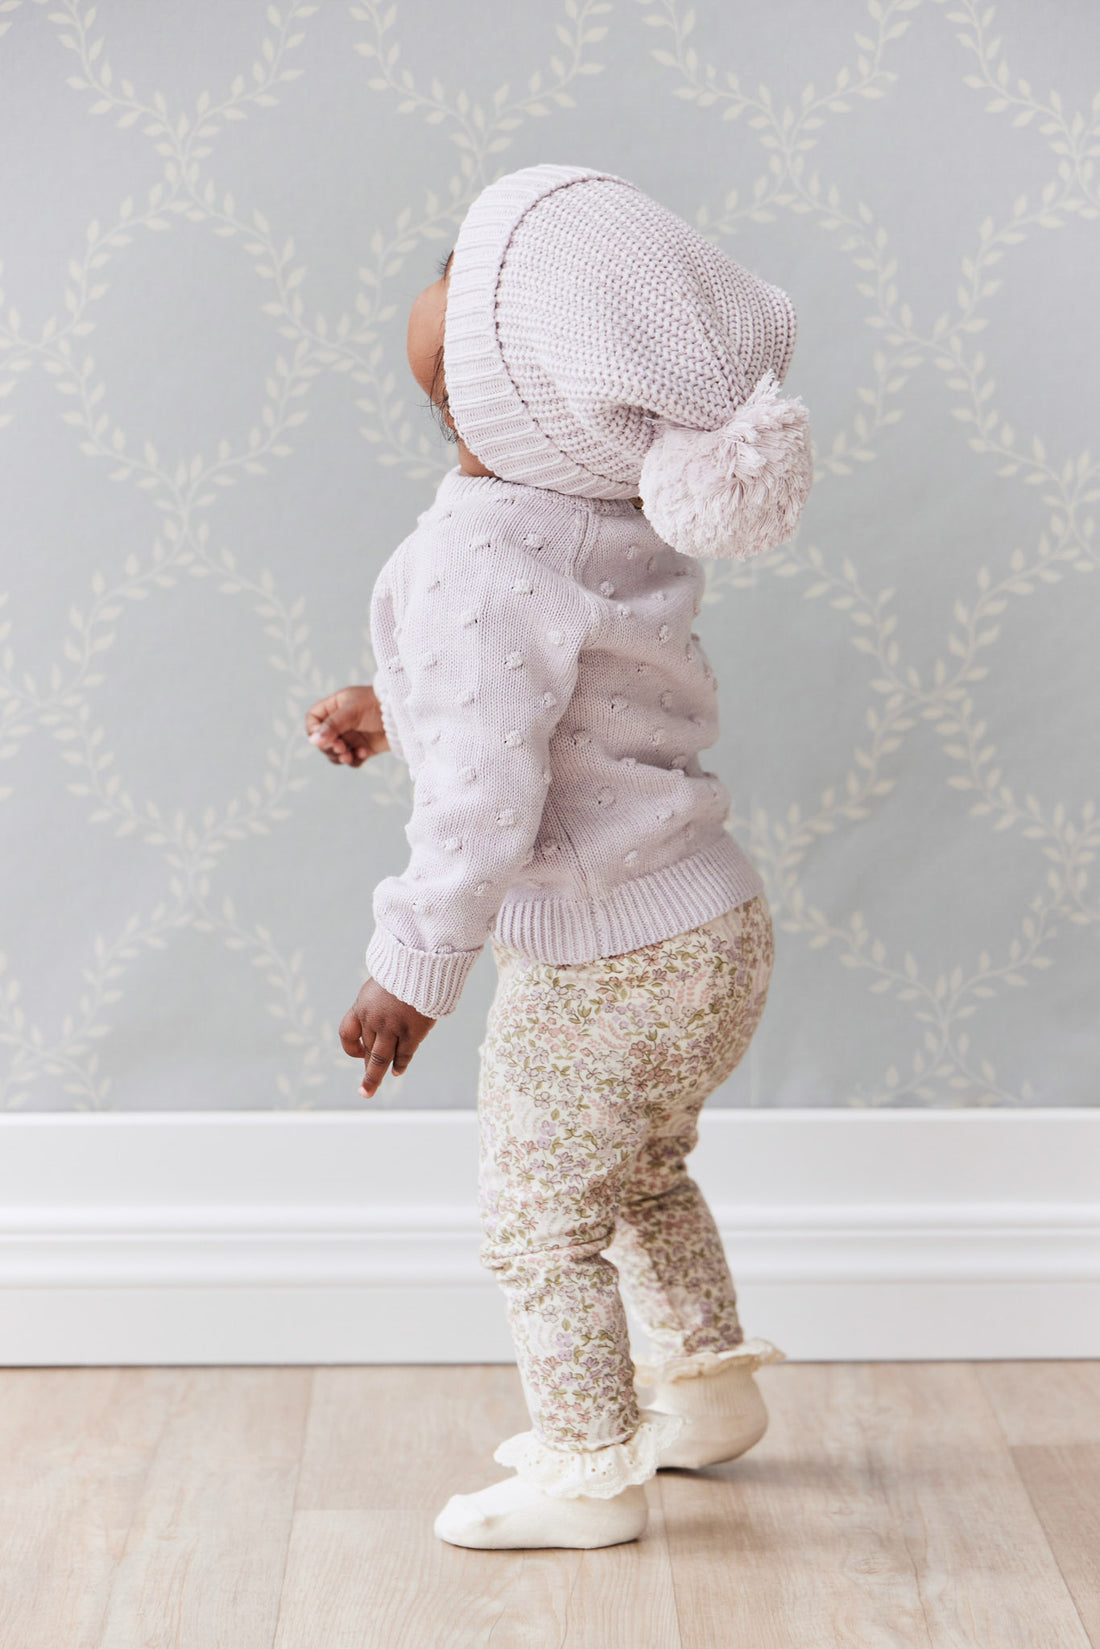 Dotty Knit Jumper - Pale Lilac Marle Childrens Jumper from Jamie Kay NZ